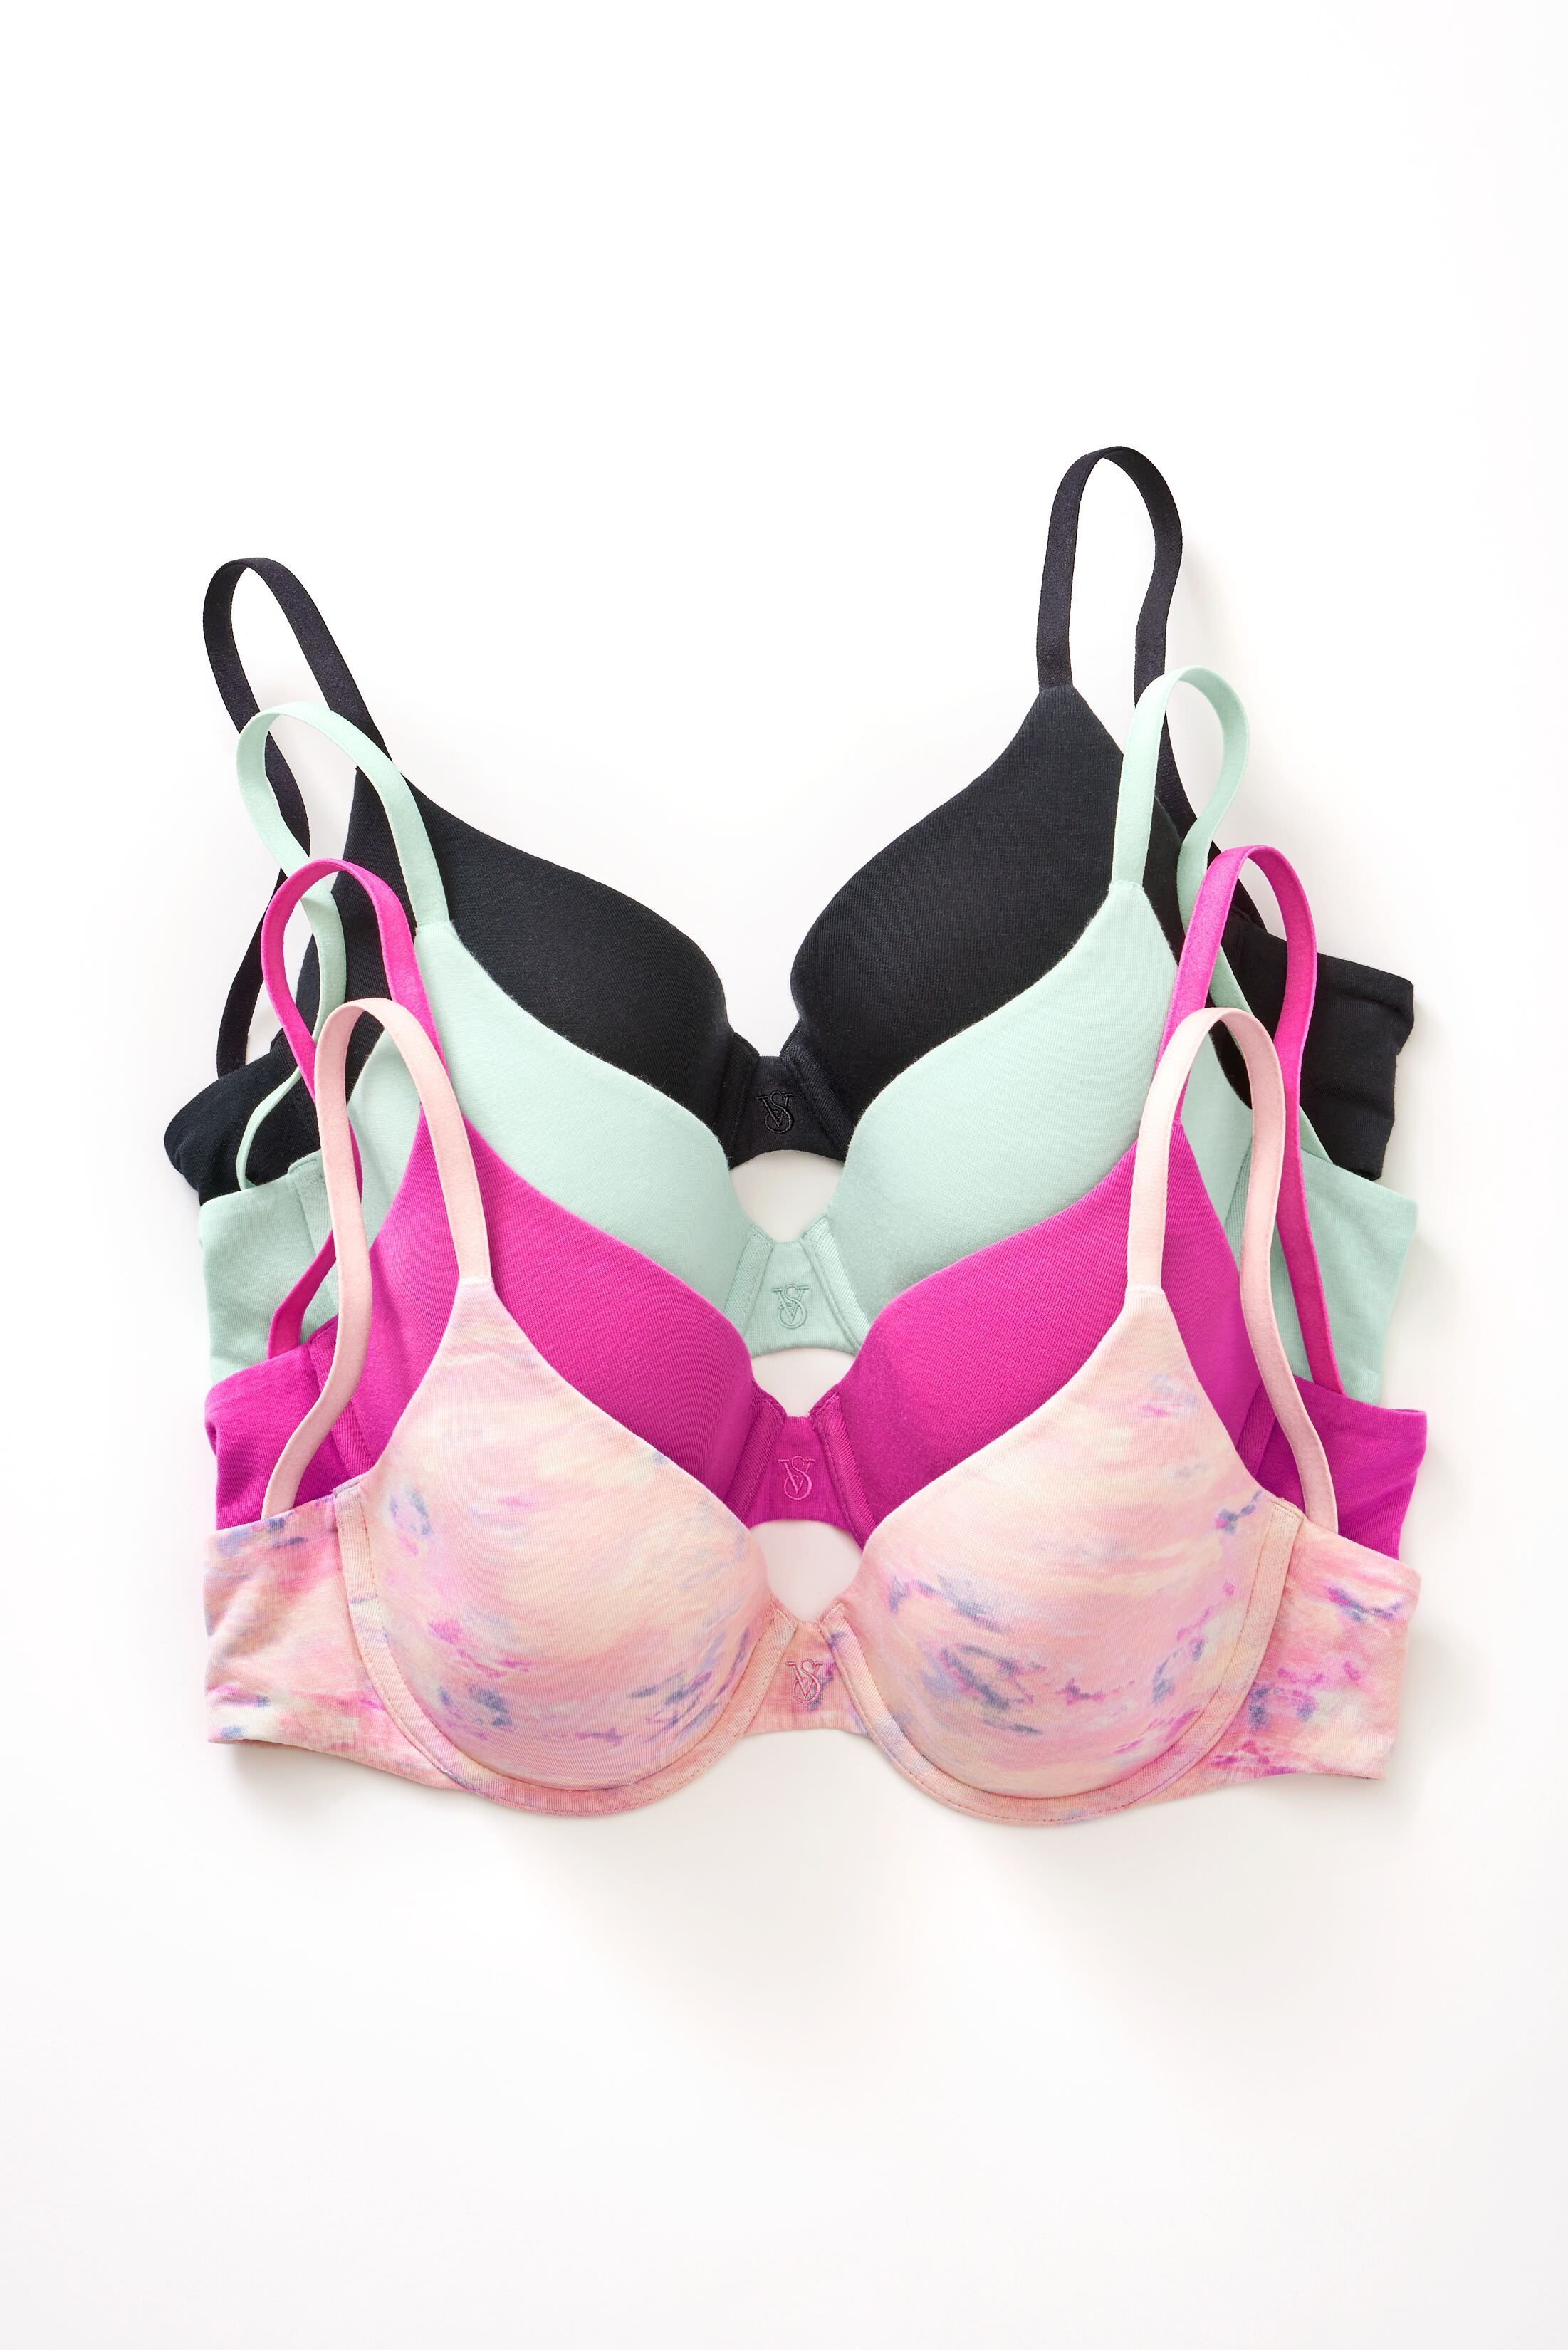 Victoria's Secret Launches Recycled Bra to Reduce Waste (VSCO